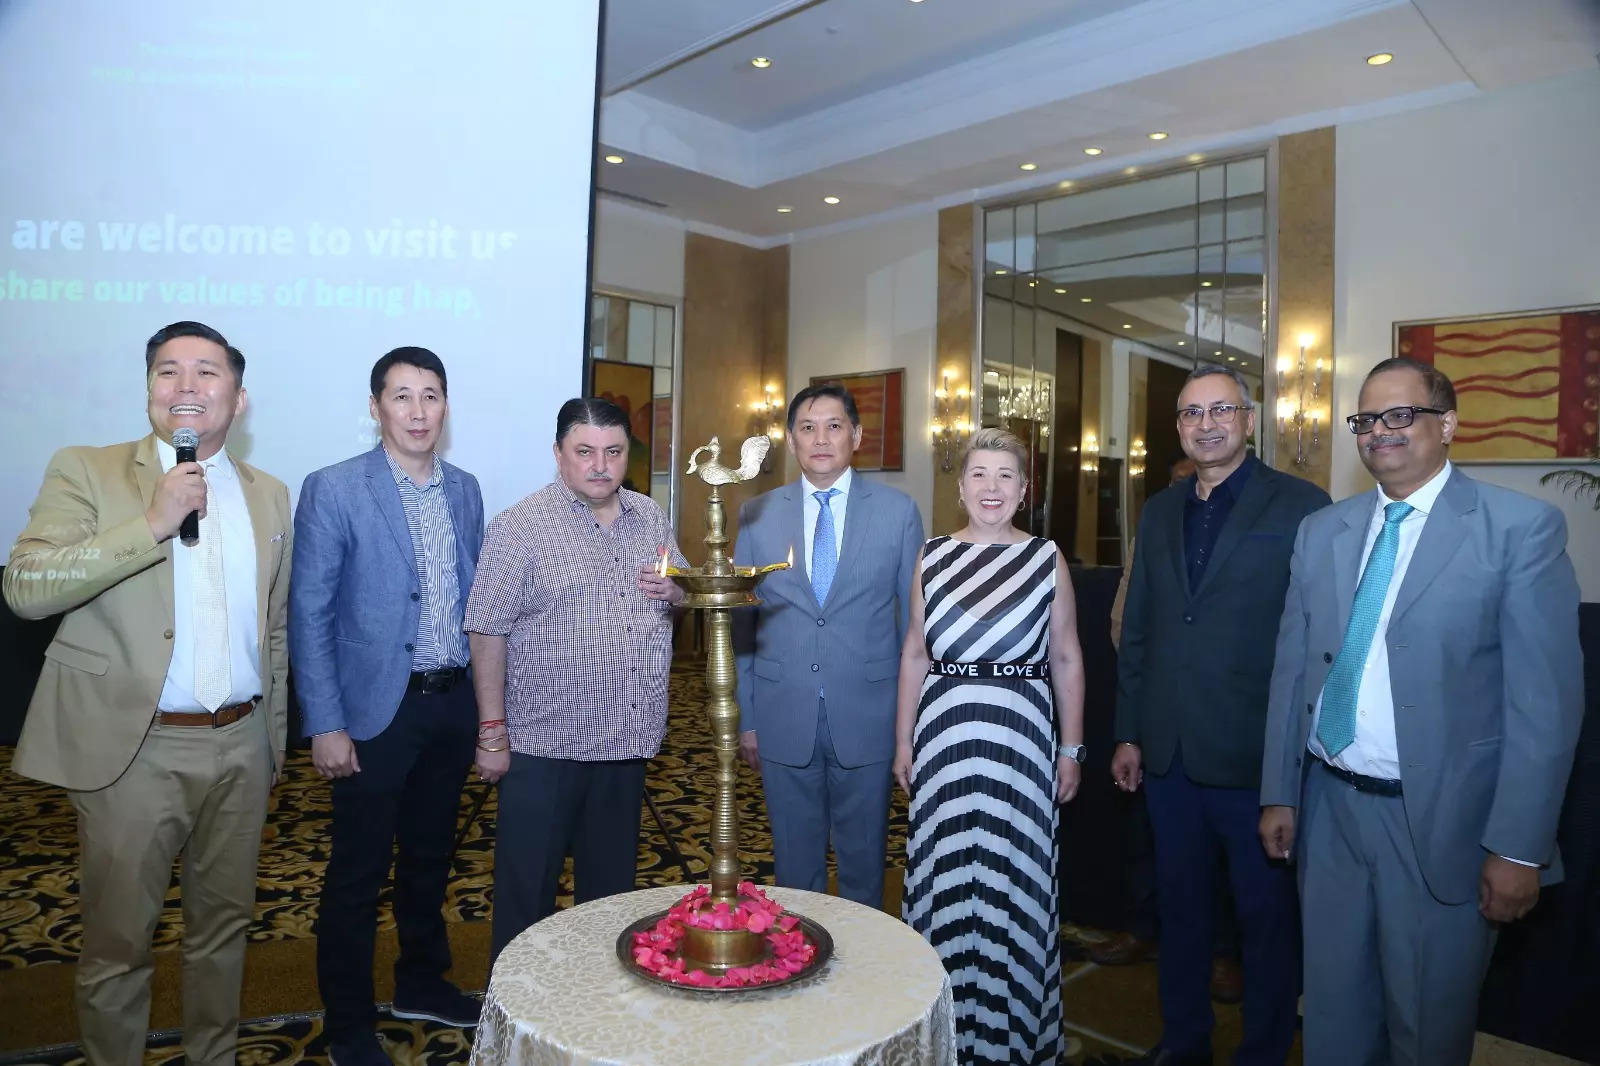  Kyrgyz Ambassador to India, Asien Isaev, and Elena Kalashnikova, President of the Tourism Development Support Fund of the Kyrgyz Republic, with other partners at the Delhi roadshow.